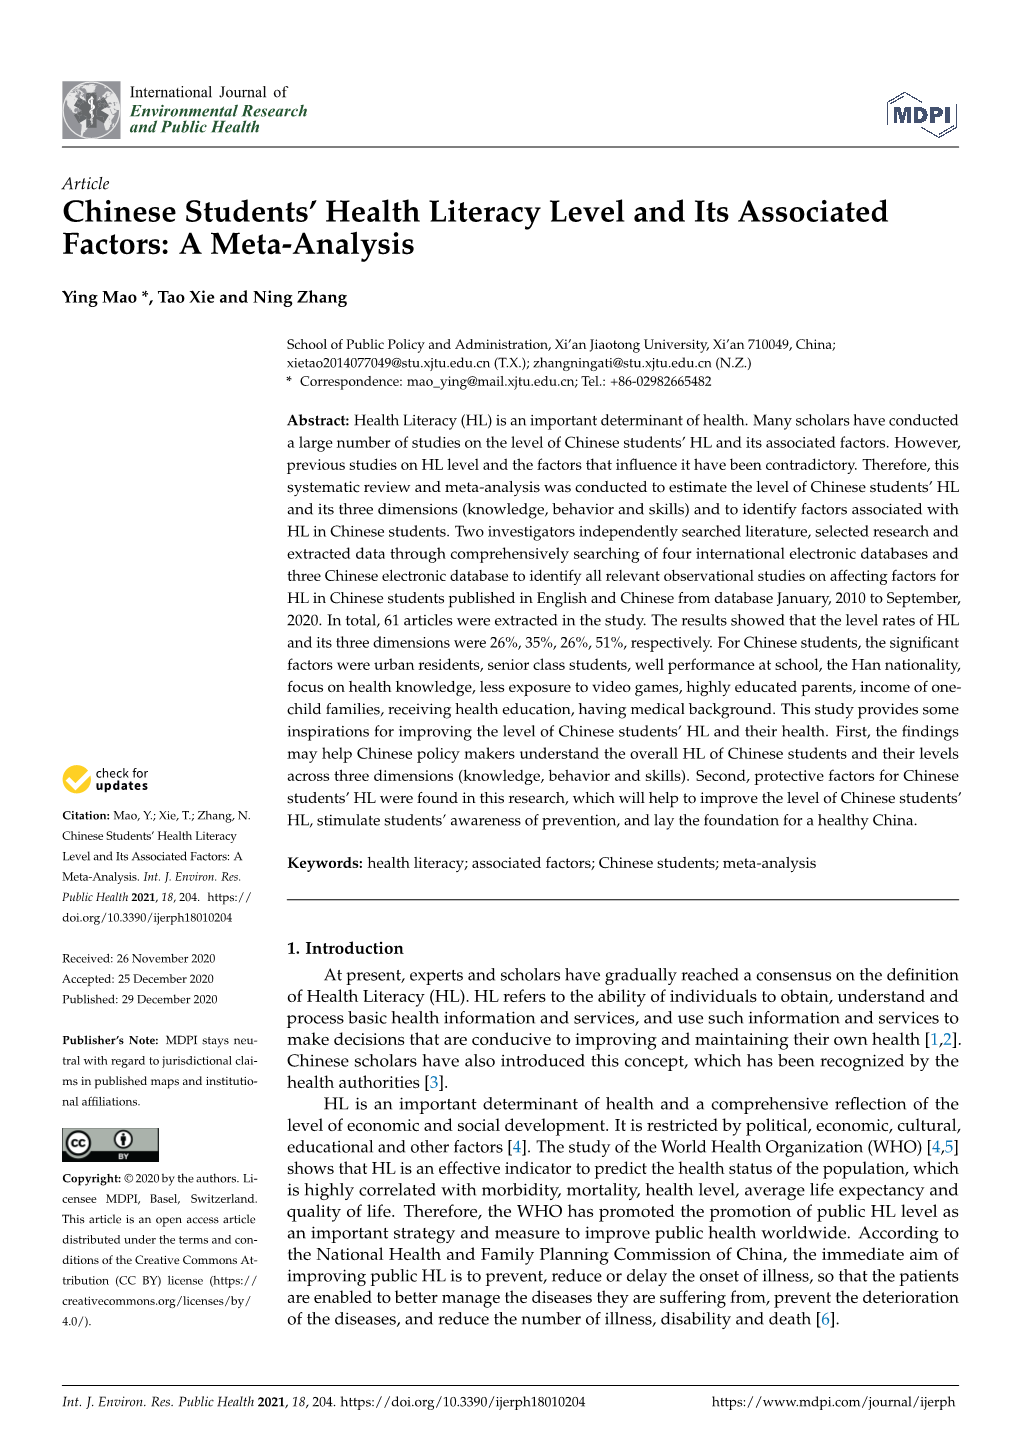 Chinese Students' Health Literacy Level and Its Associated Factors: a Meta-Analysis